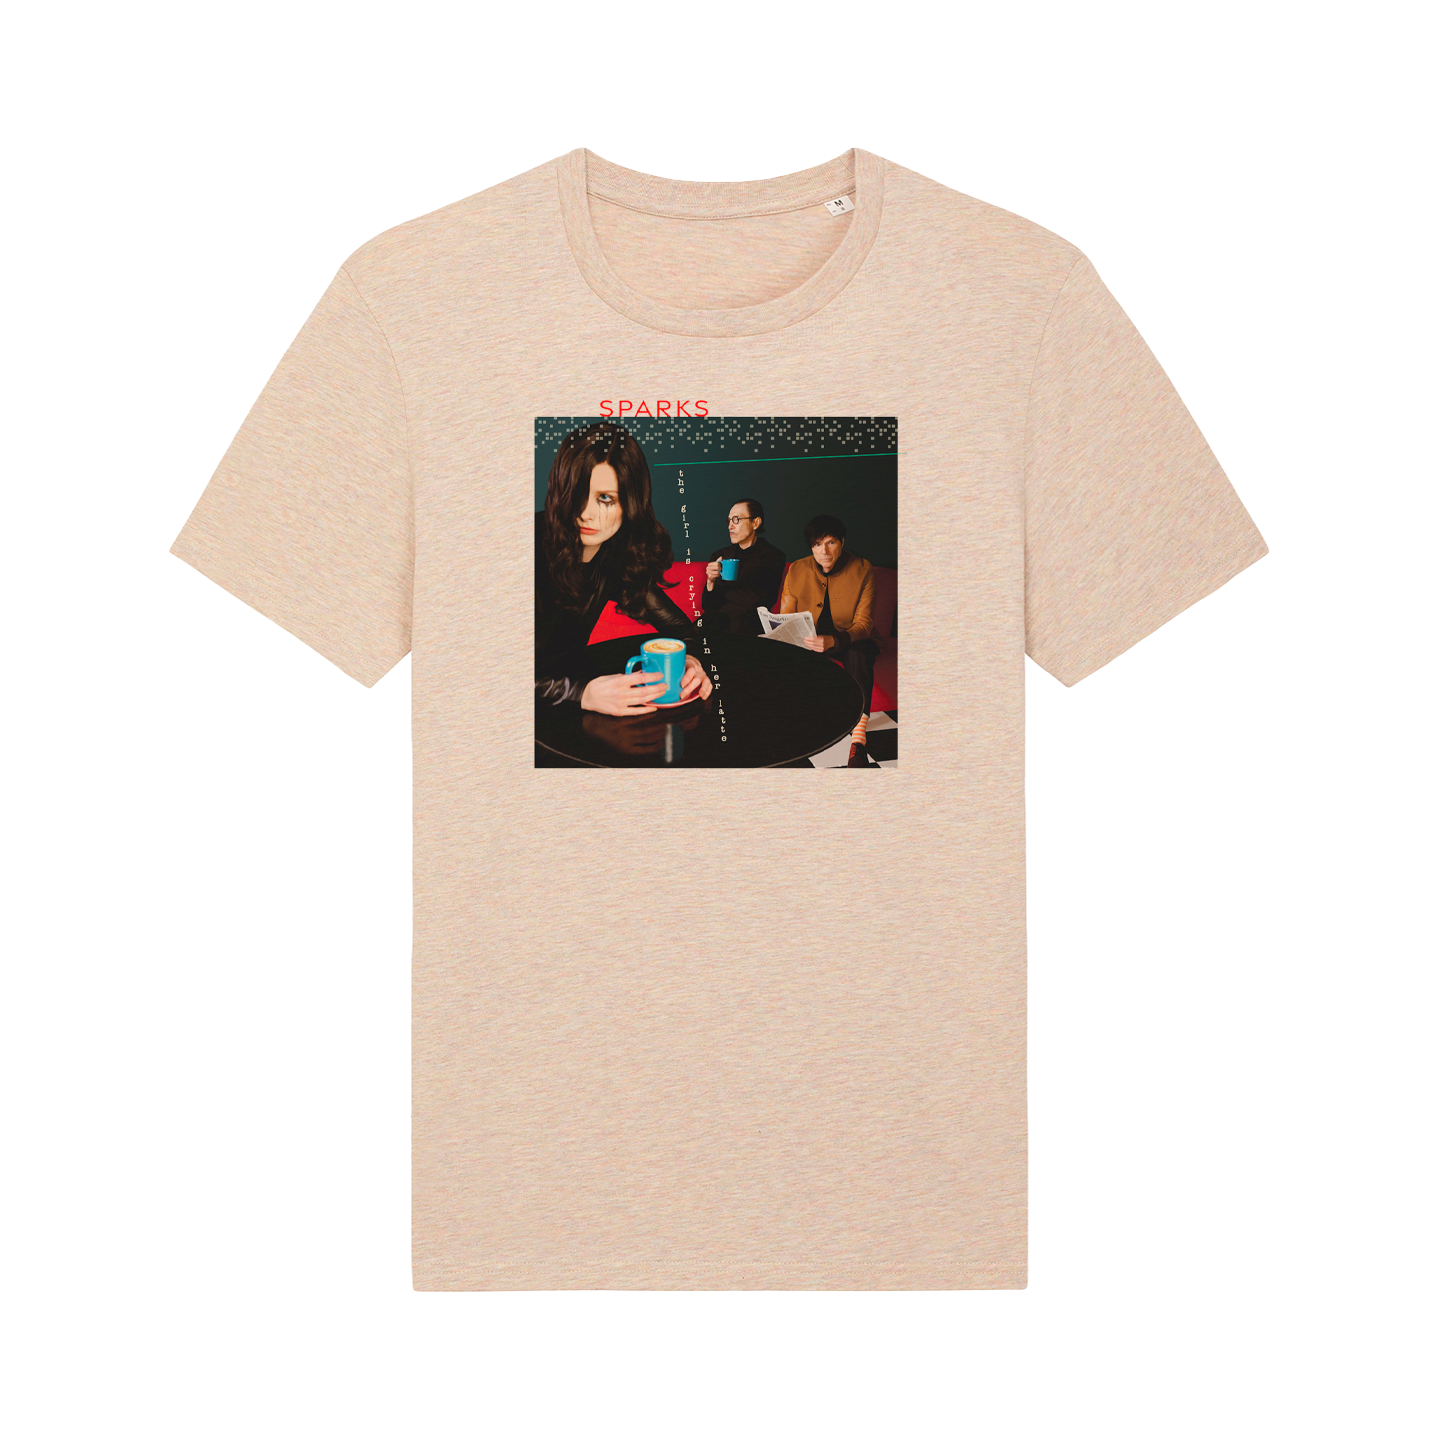 The Girl Is Crying In Her Latte Album Cover T-shirt